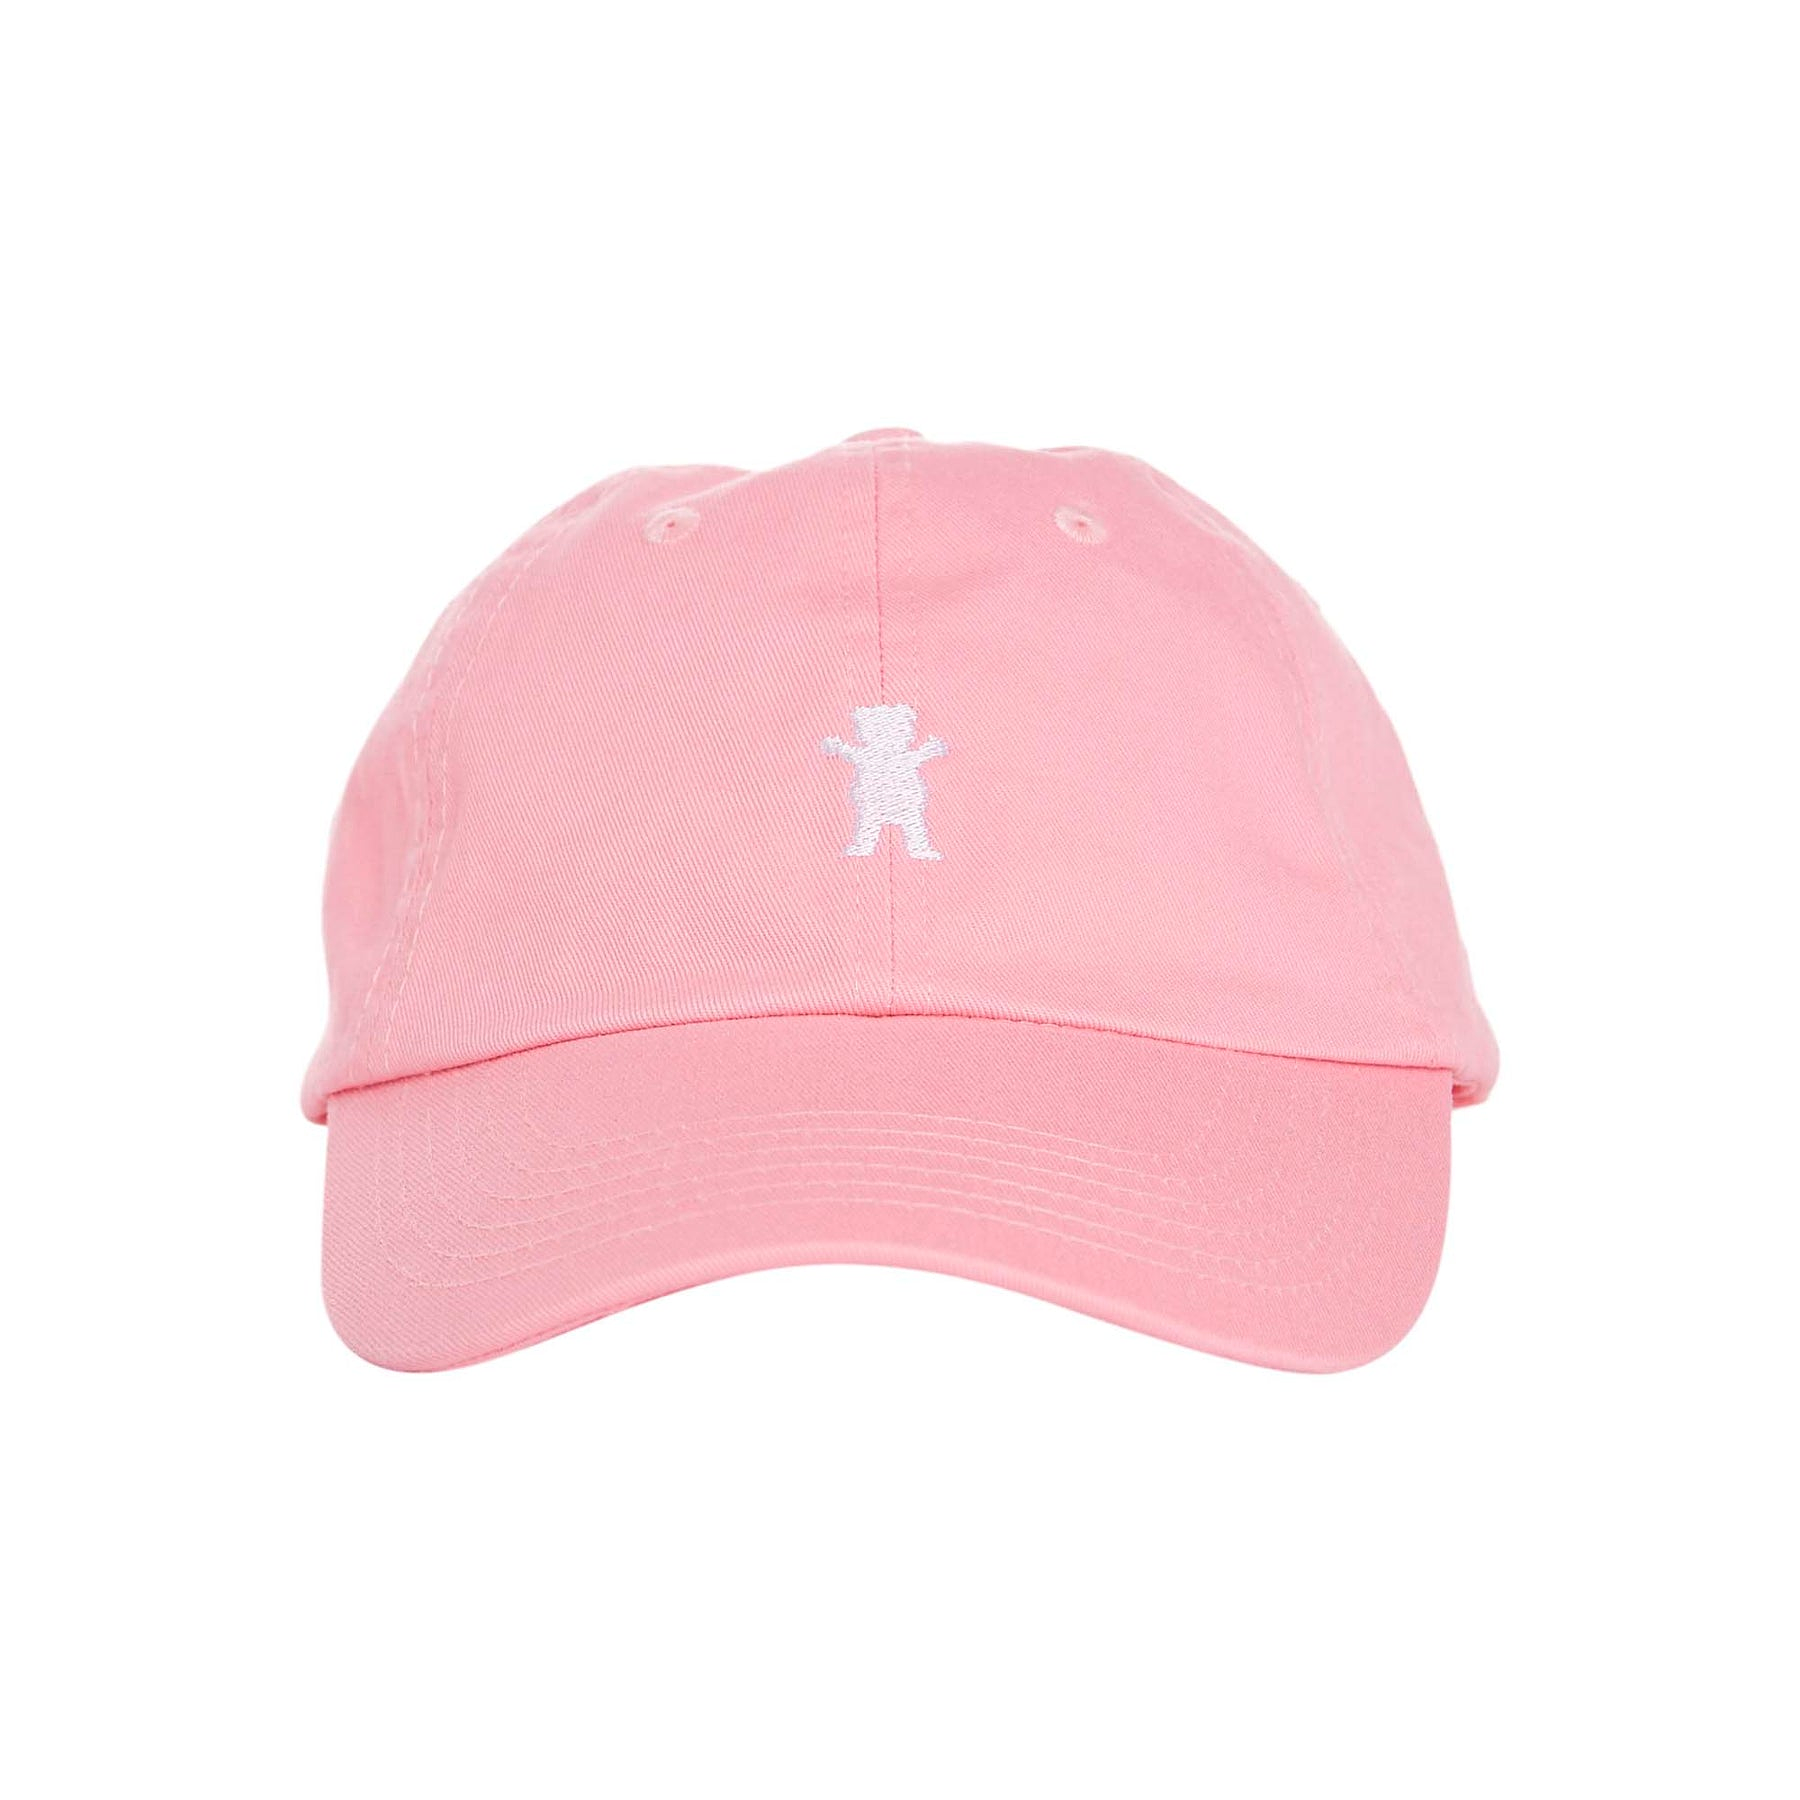 GORRO GRIZZLY HAT IN PINK